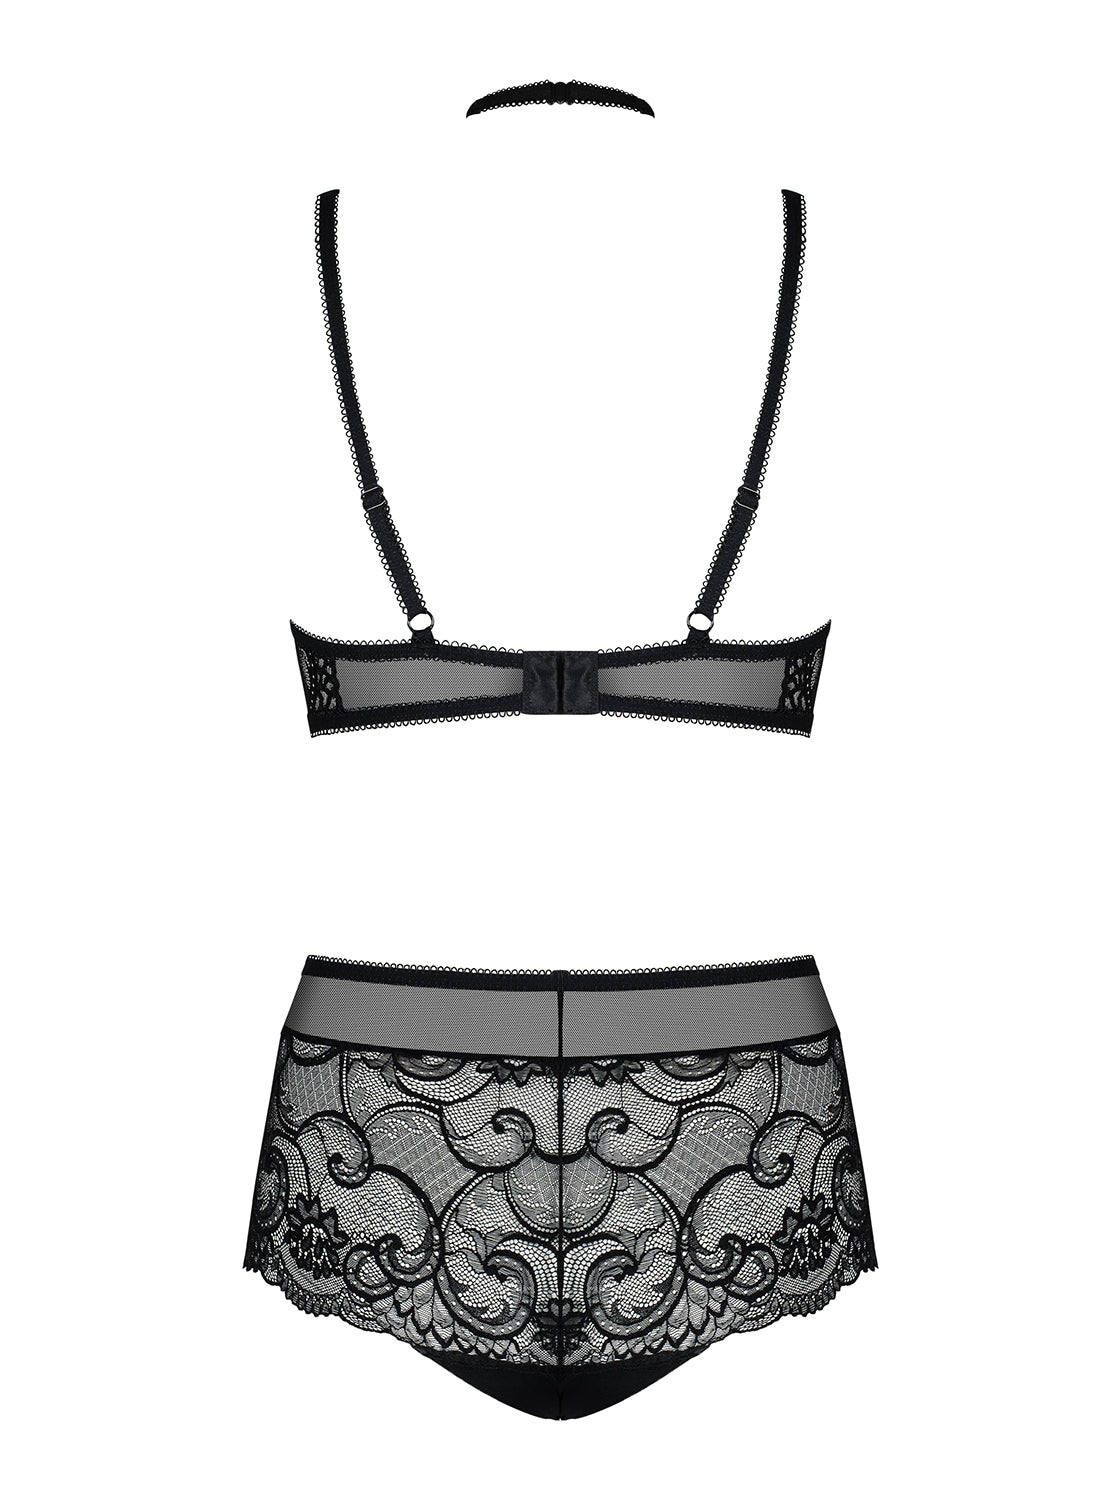 Elizenes a seductive black lingerie set made of transparent and elastic material with floral lace